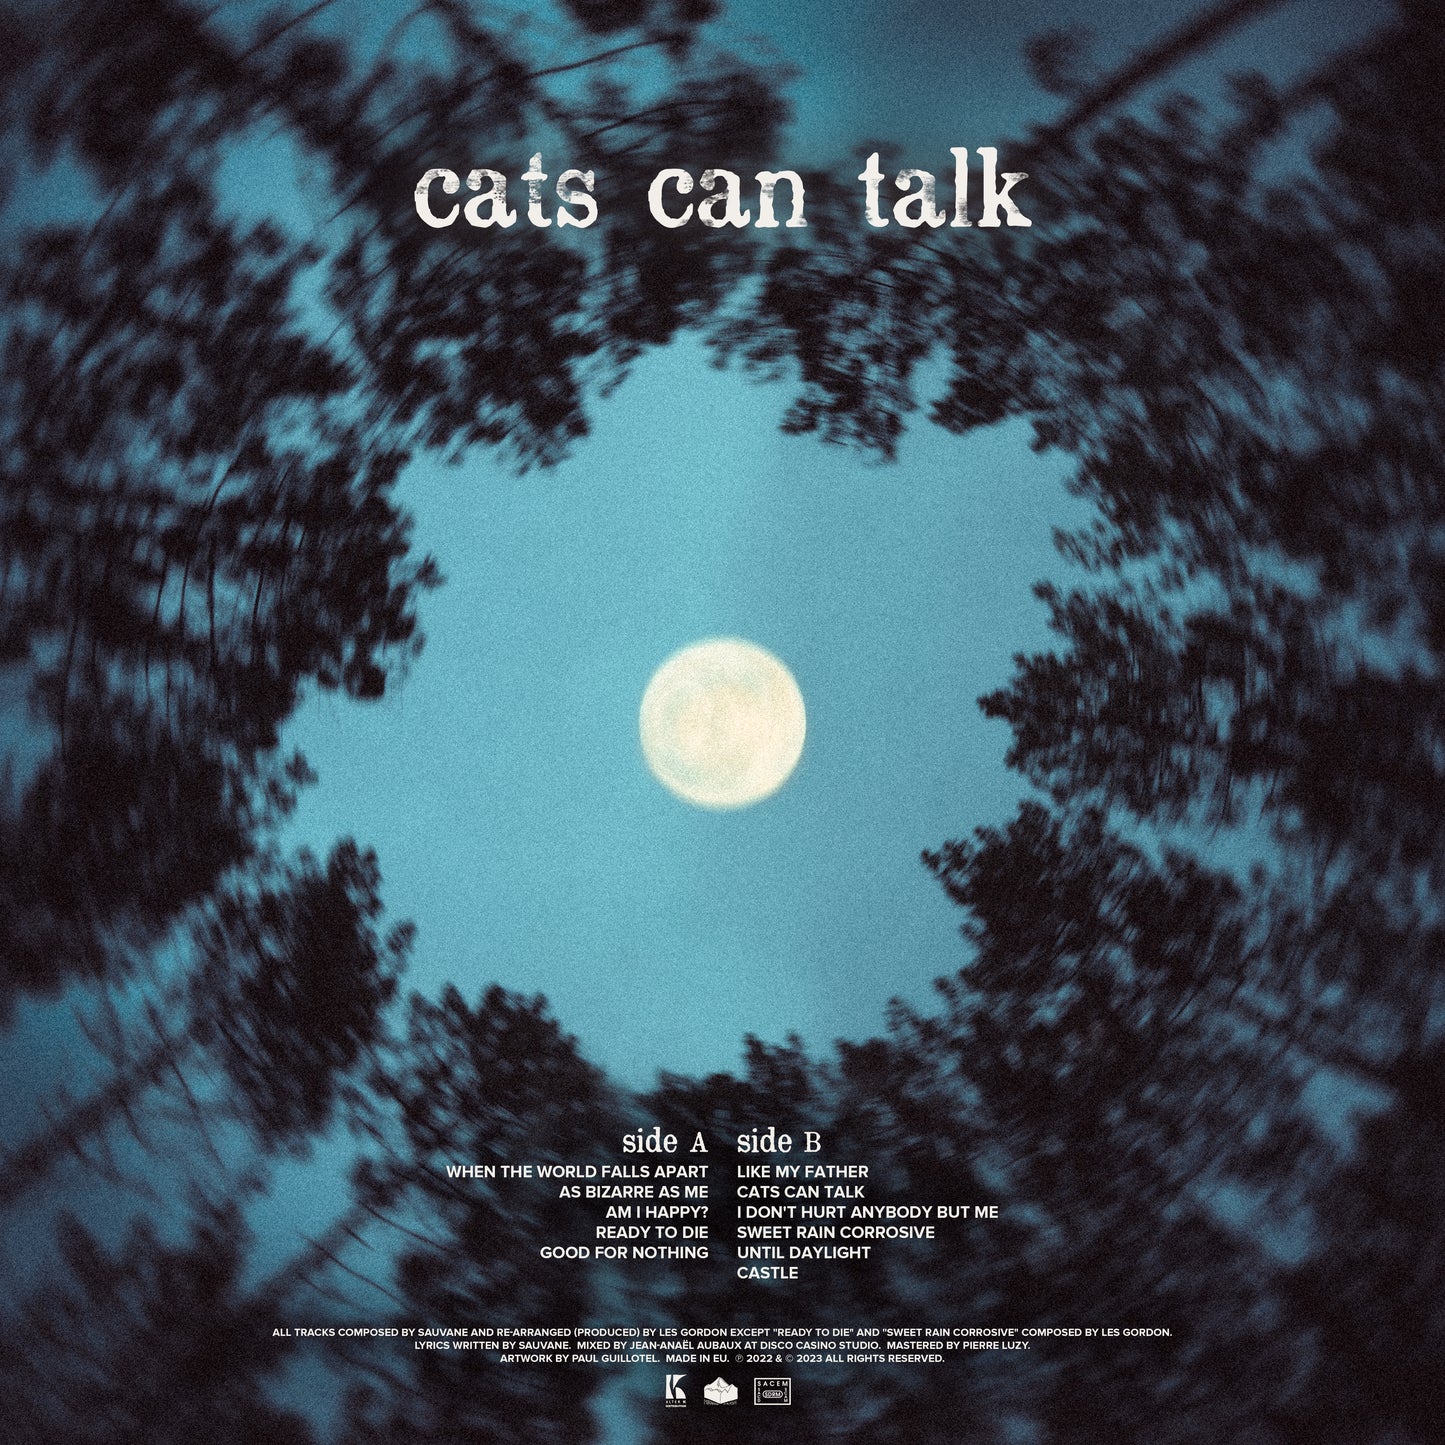 CATS CAN TALK LIMITED EDITION VINYL